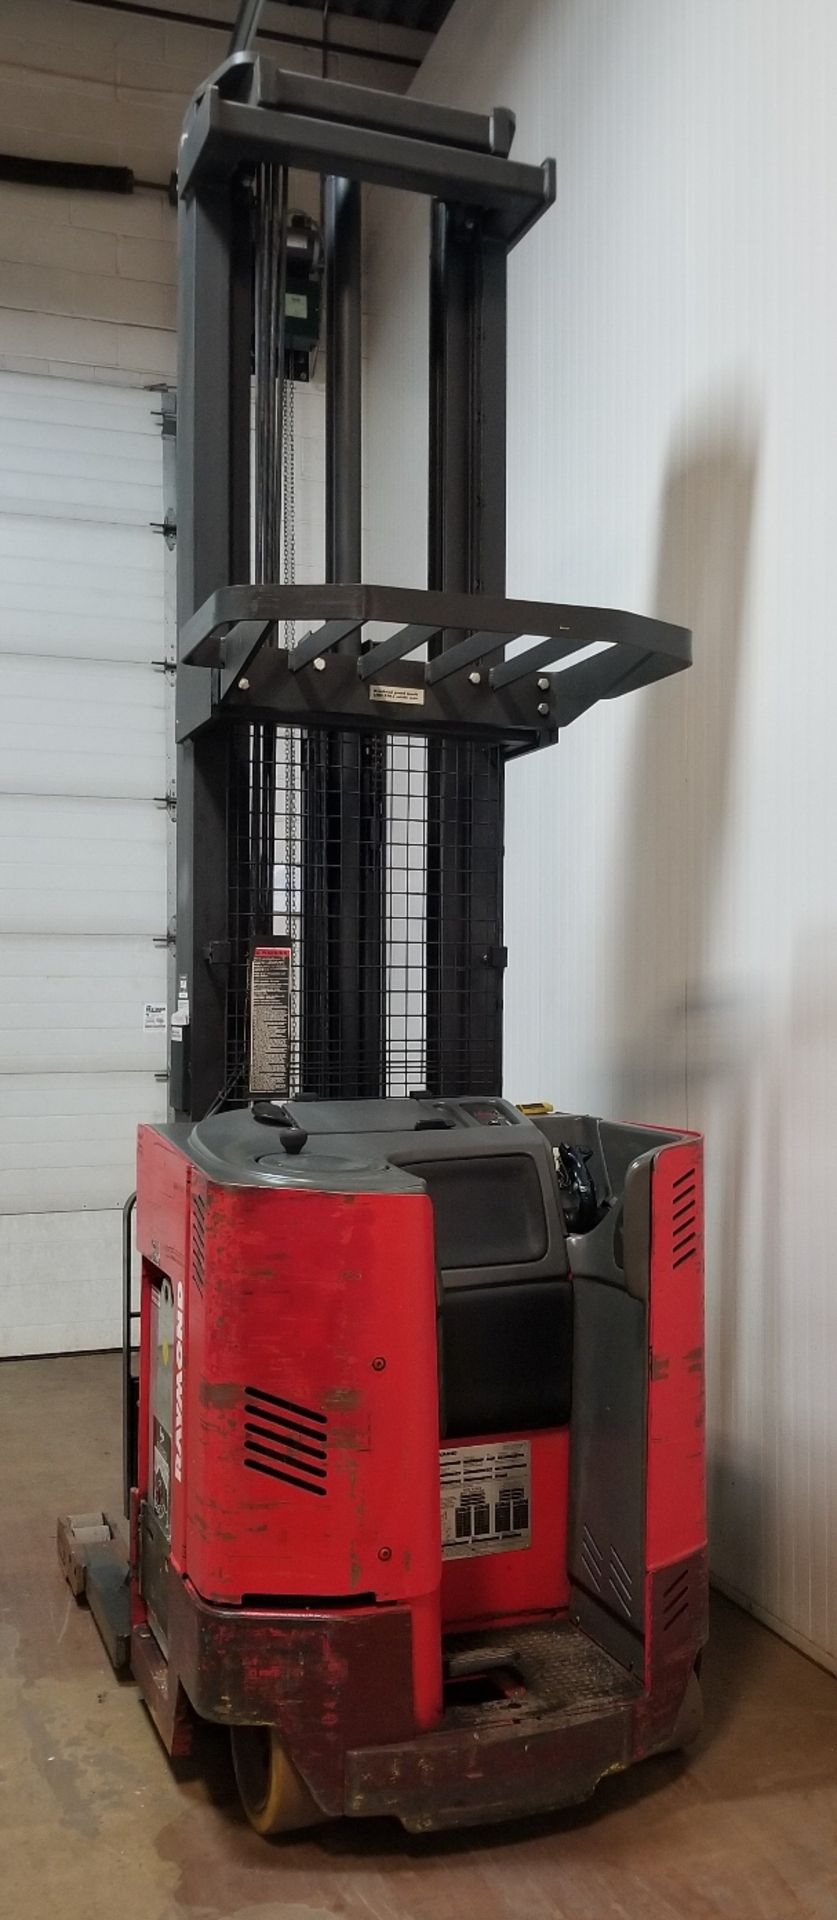 RAYMOND (2003) R40TT 4,000 LB. CAPACITY 36V ELECTRIC REACH TRUCK WITH 321" MAX. LIFT HEIGHT, - Image 2 of 2